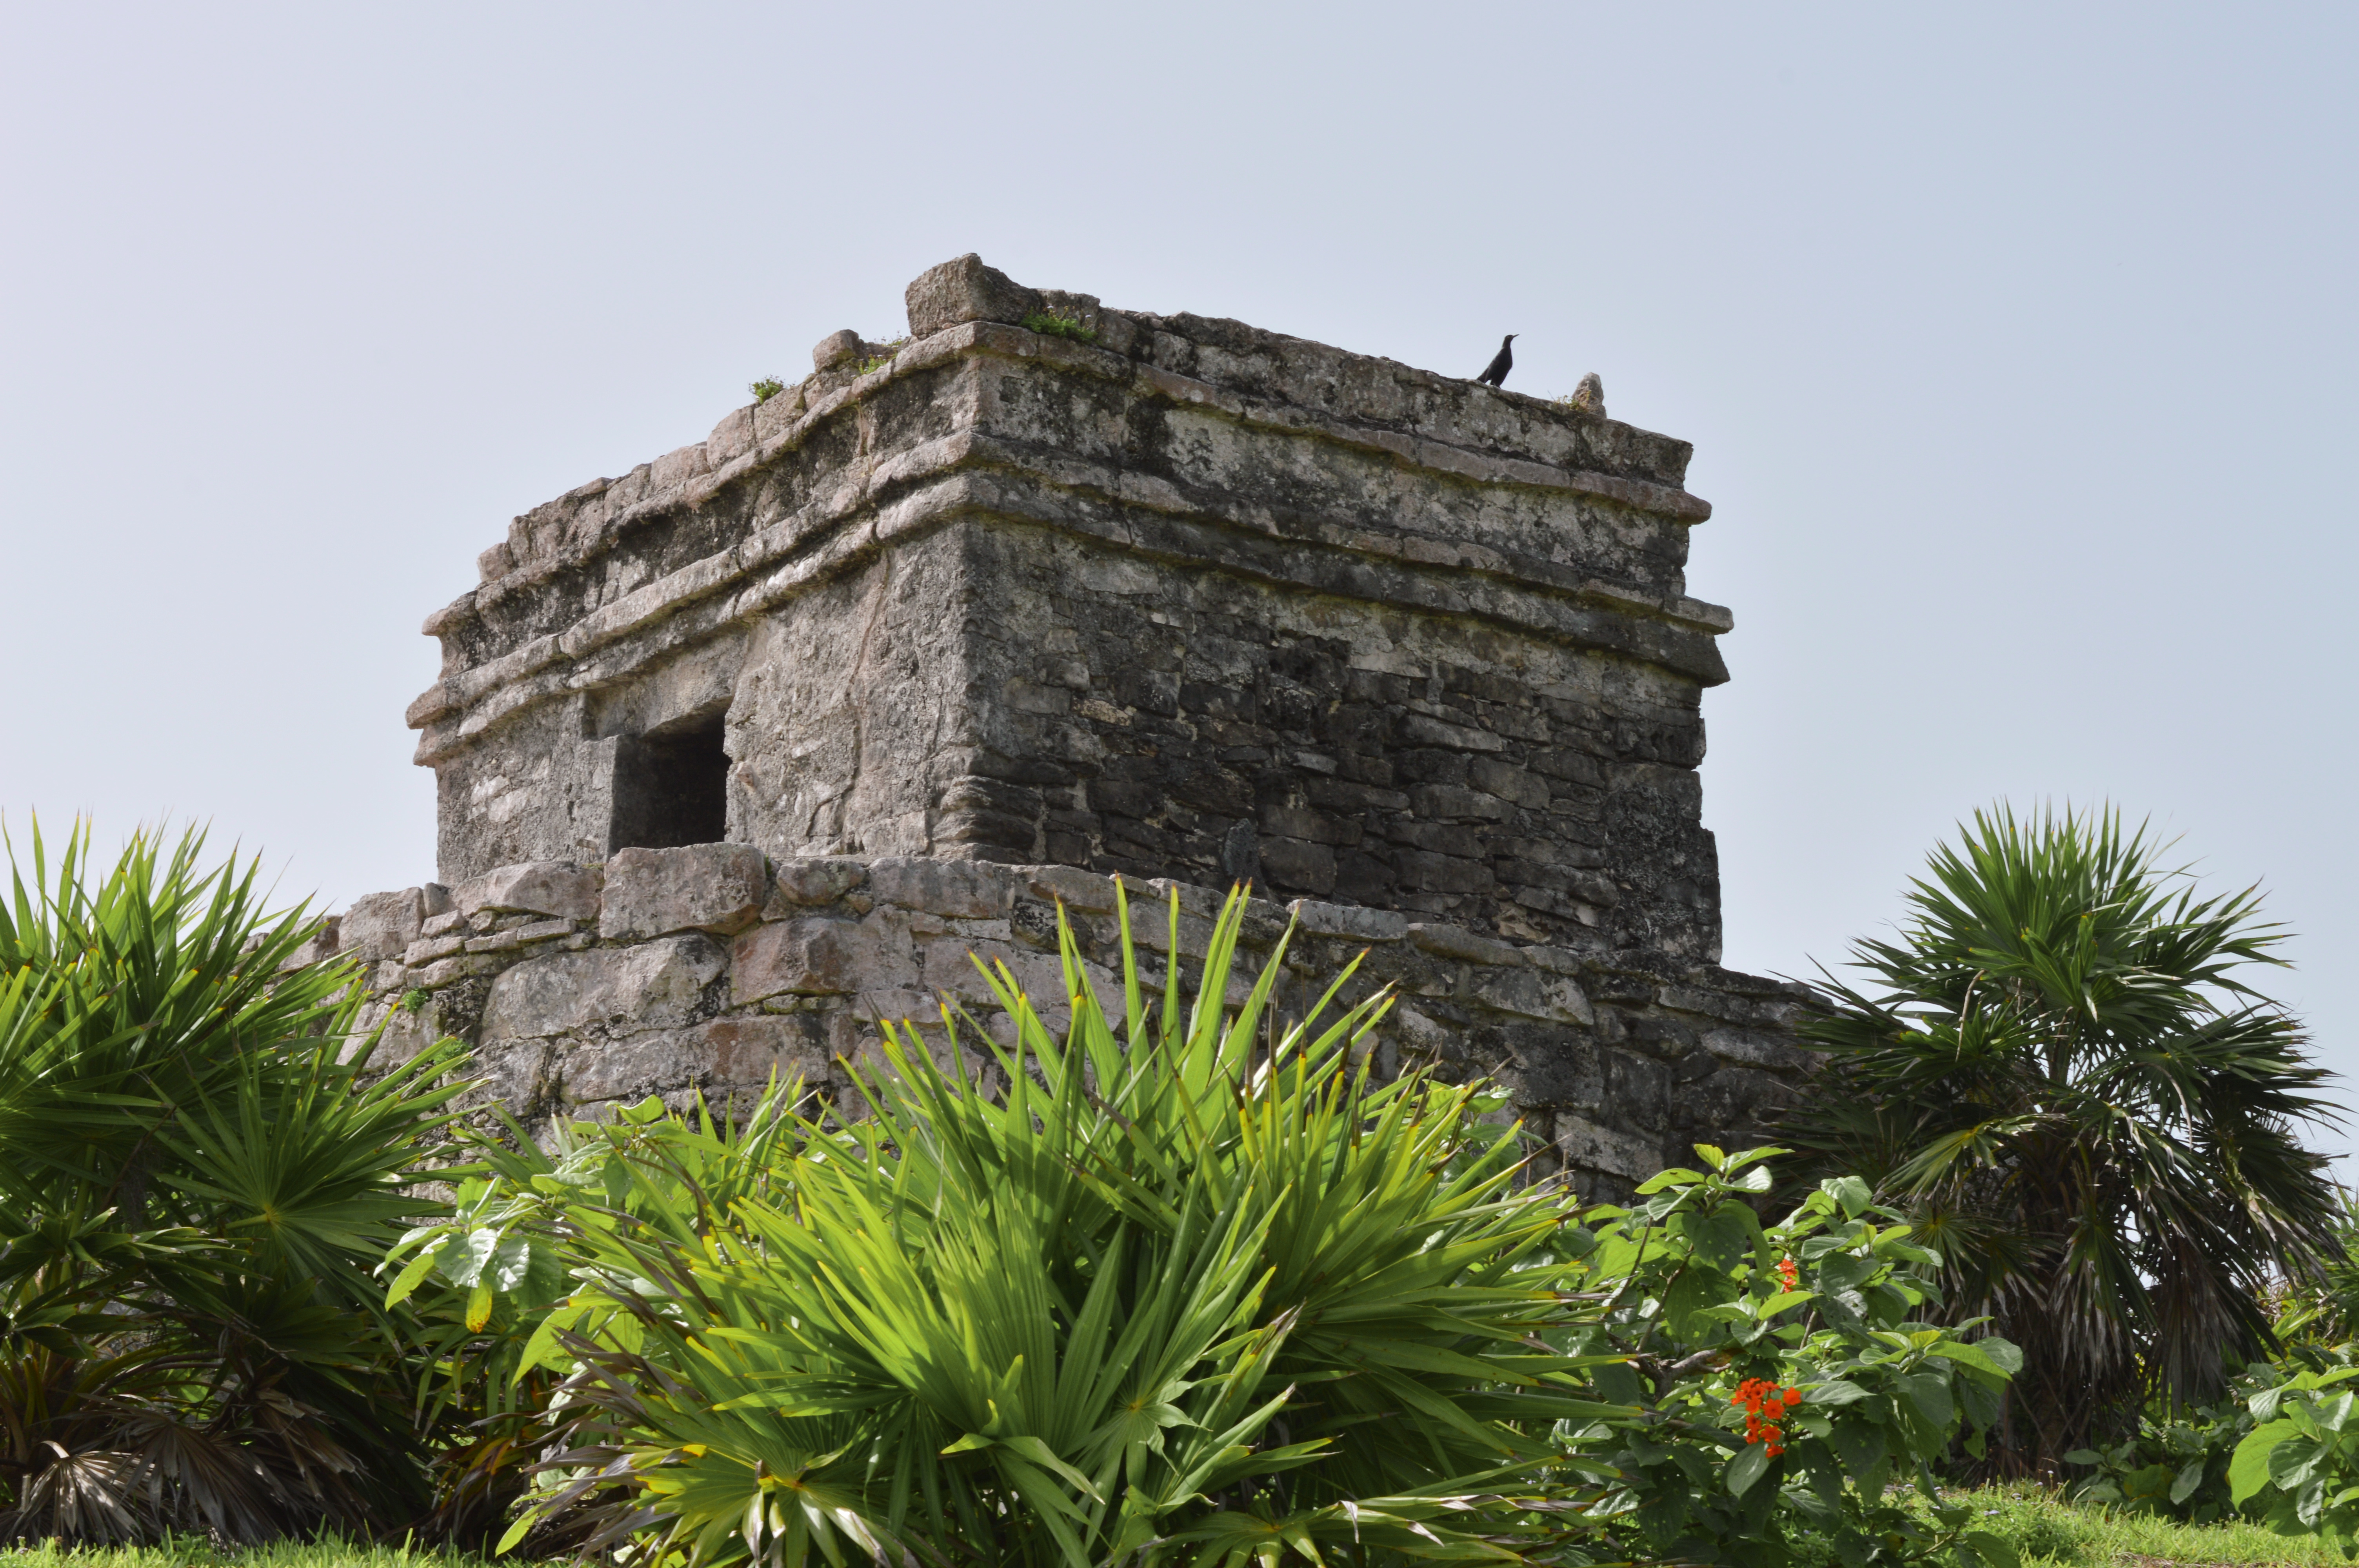 A bird sitting on the ruins in Tulum